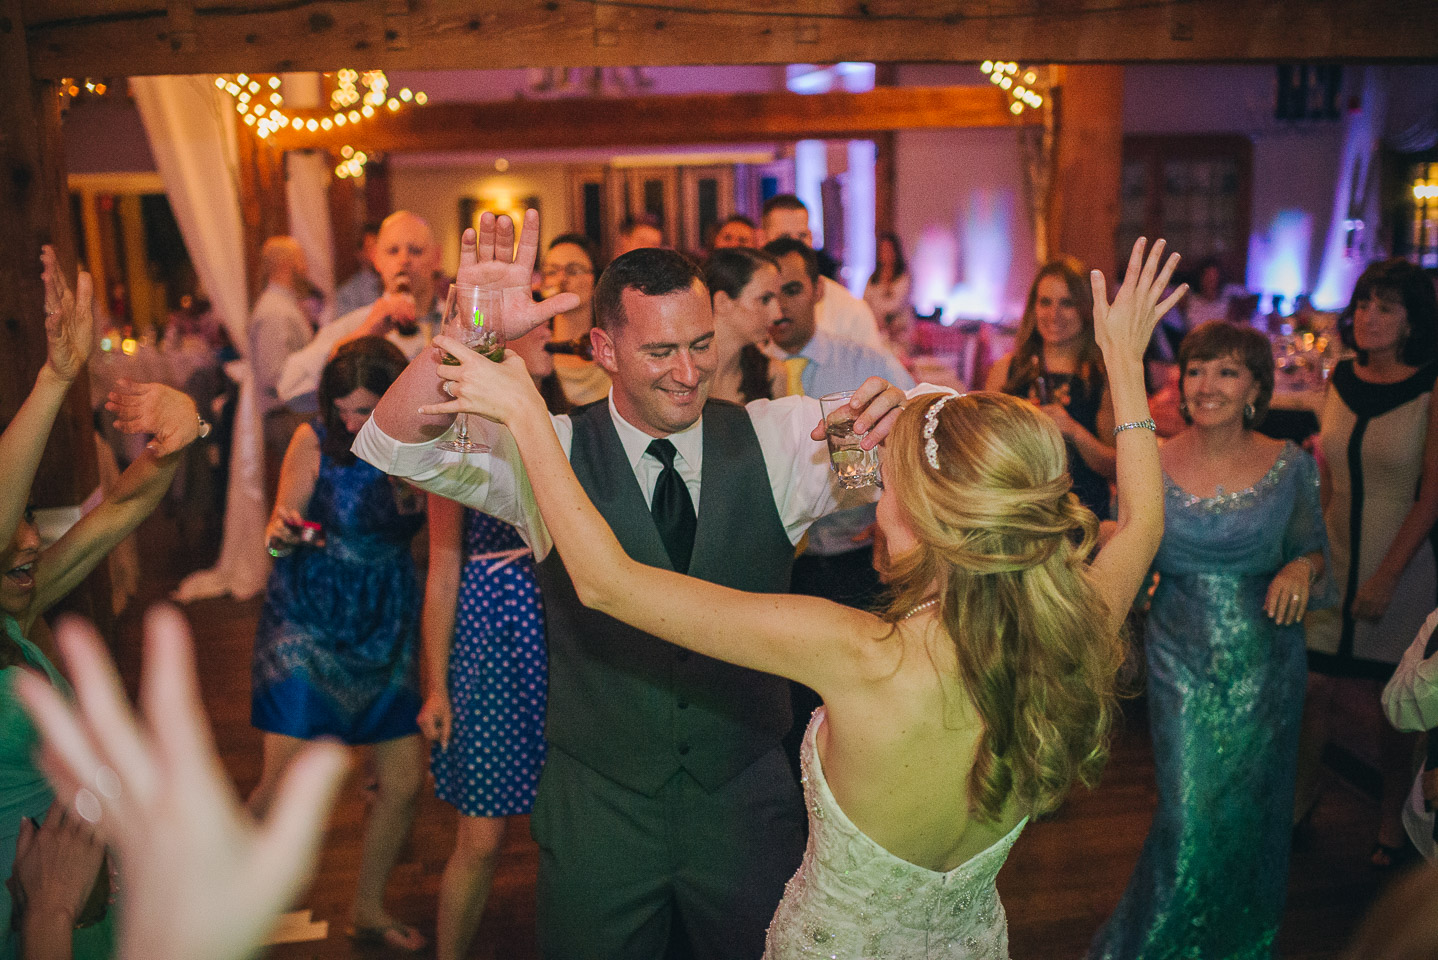 NH Wedding Photographer: guests dancing with bride and groom